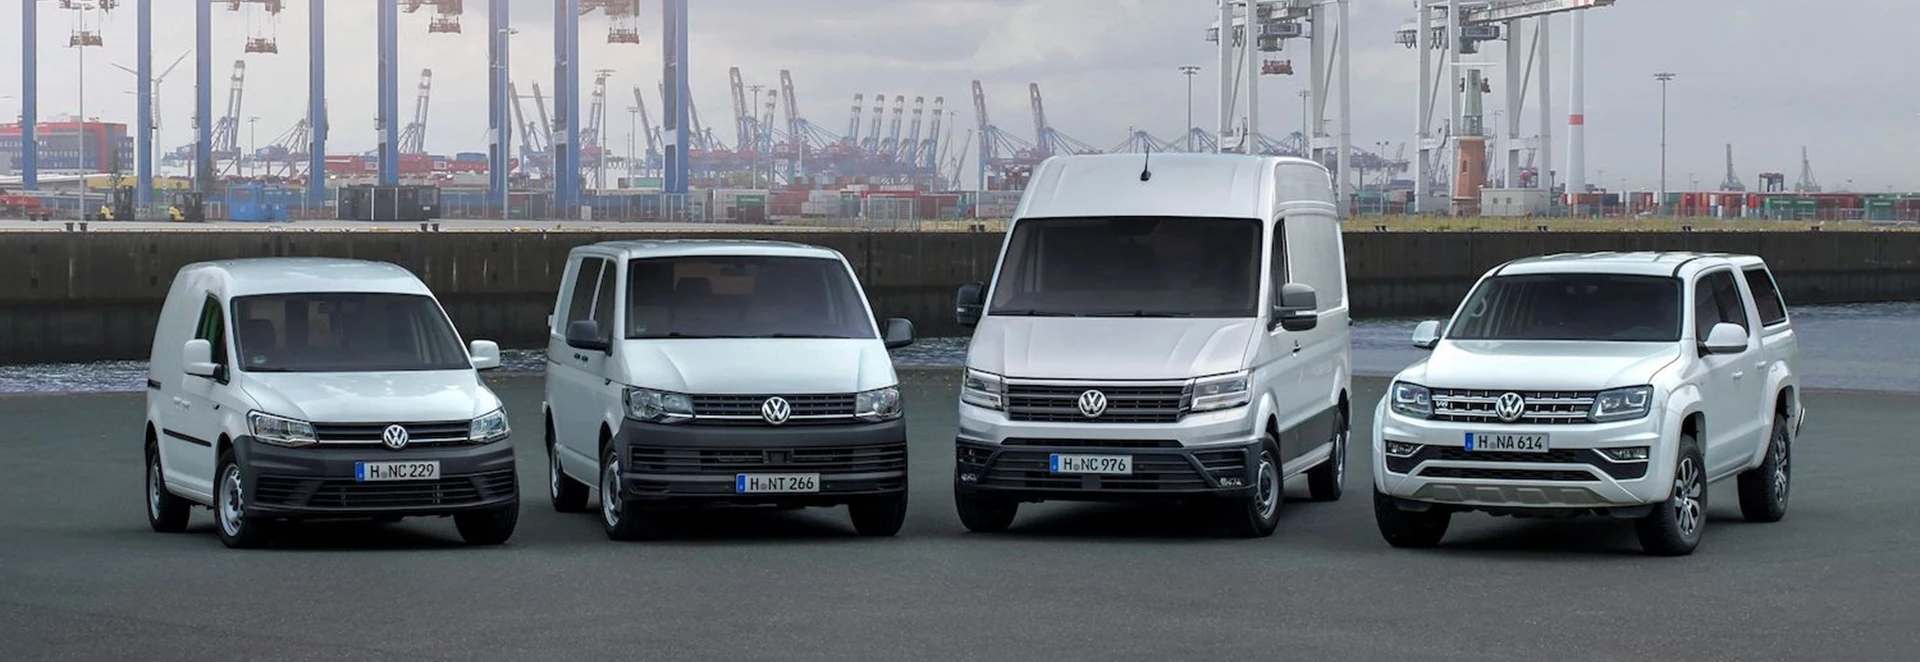 VW Commercial Vehicles has fast start to 2019